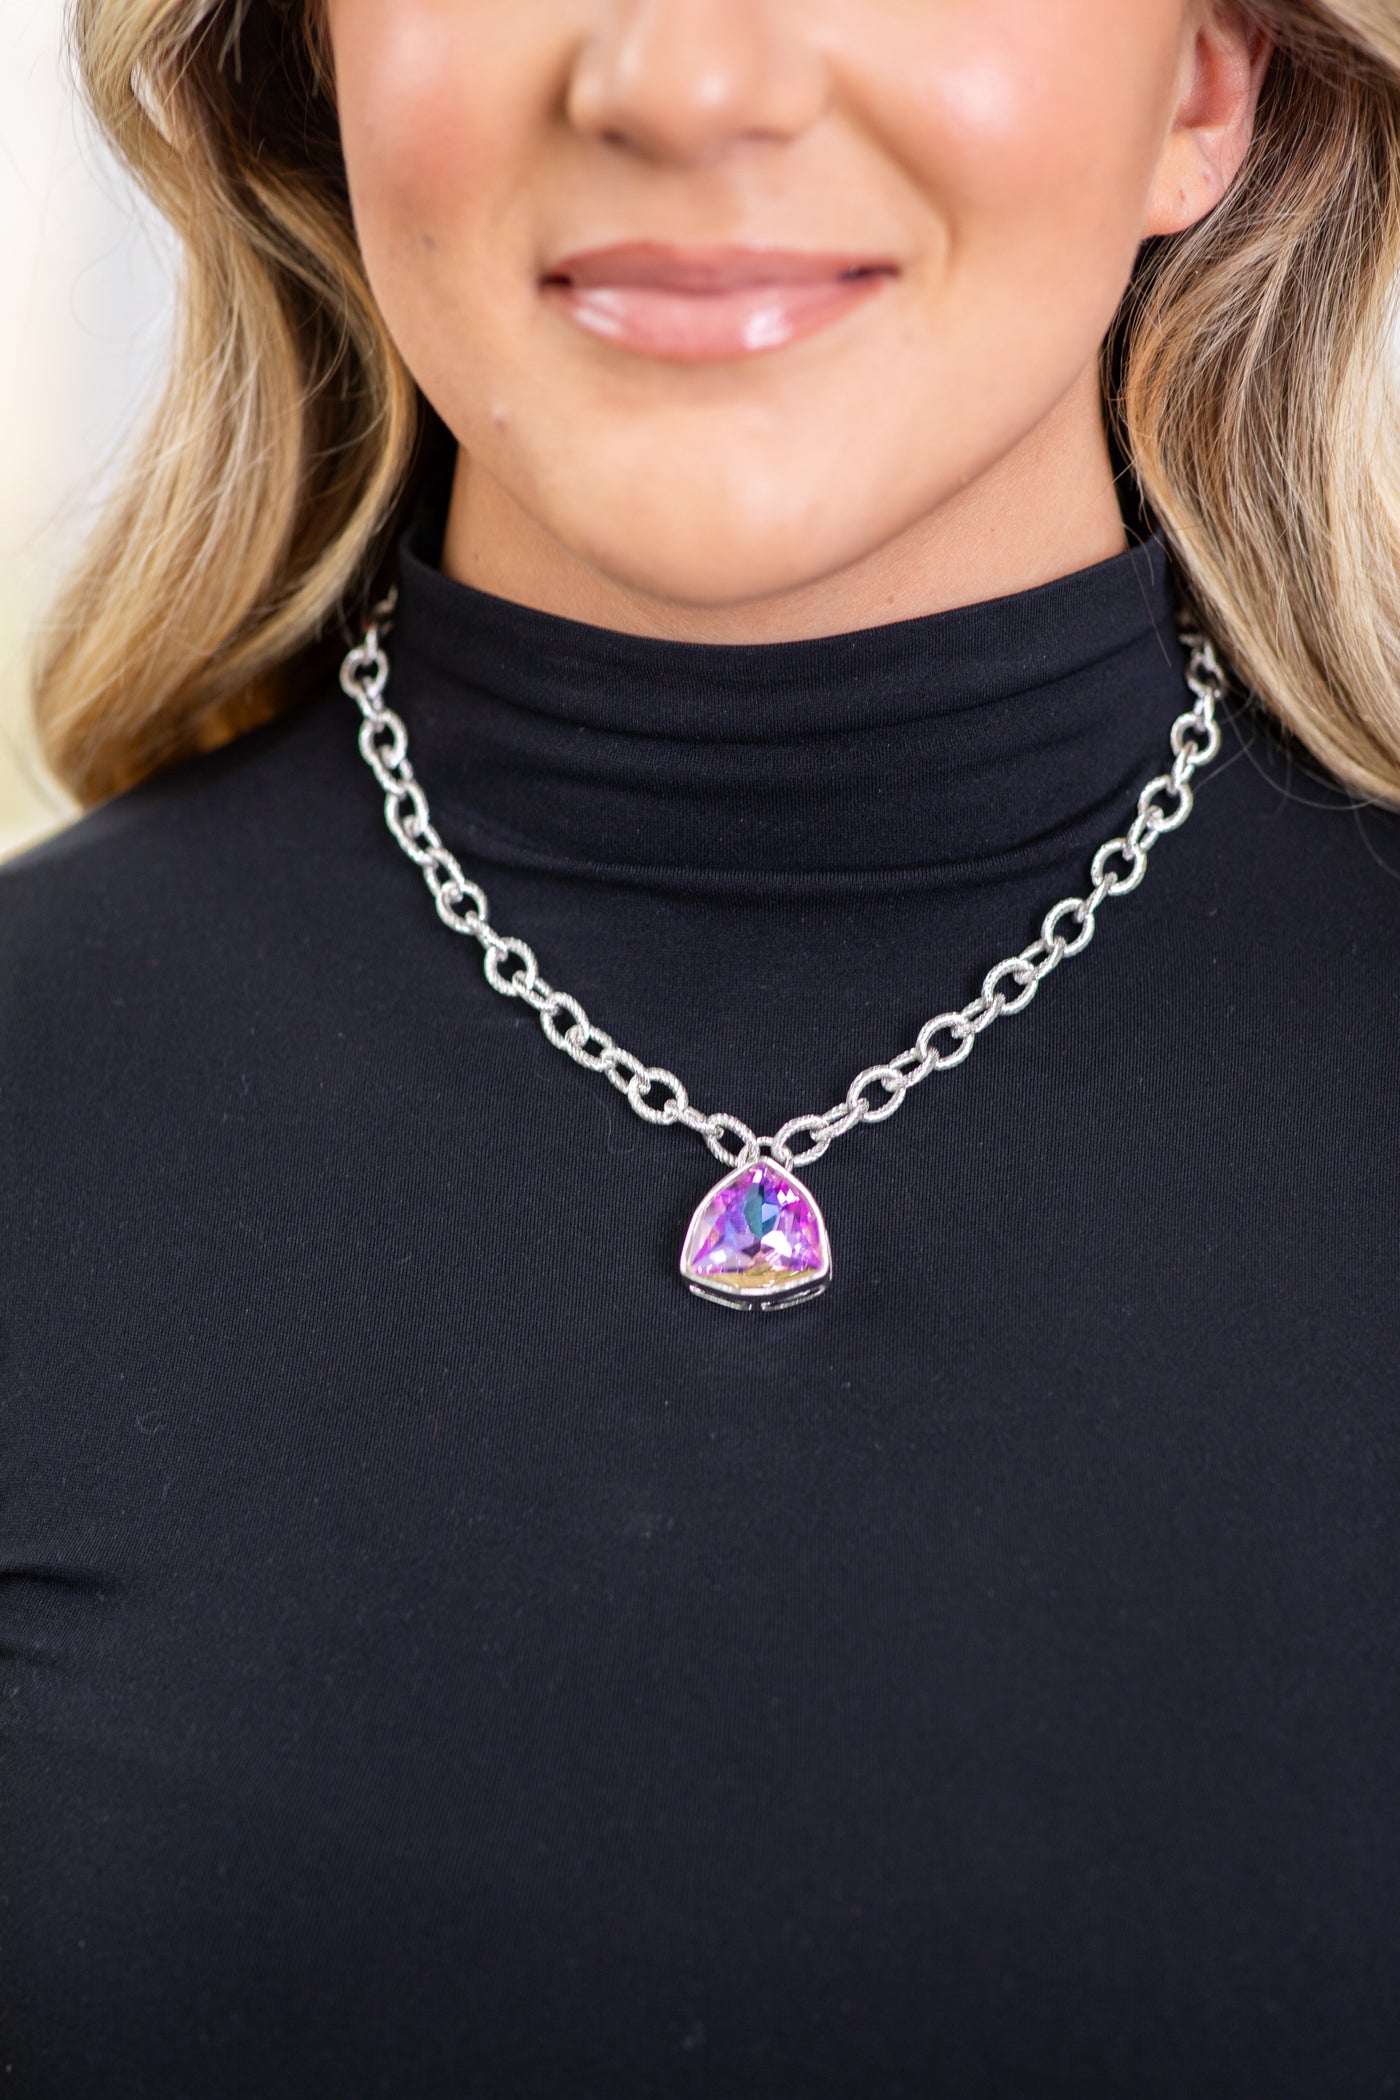 Silver Necklace With Purple Stone Pendant